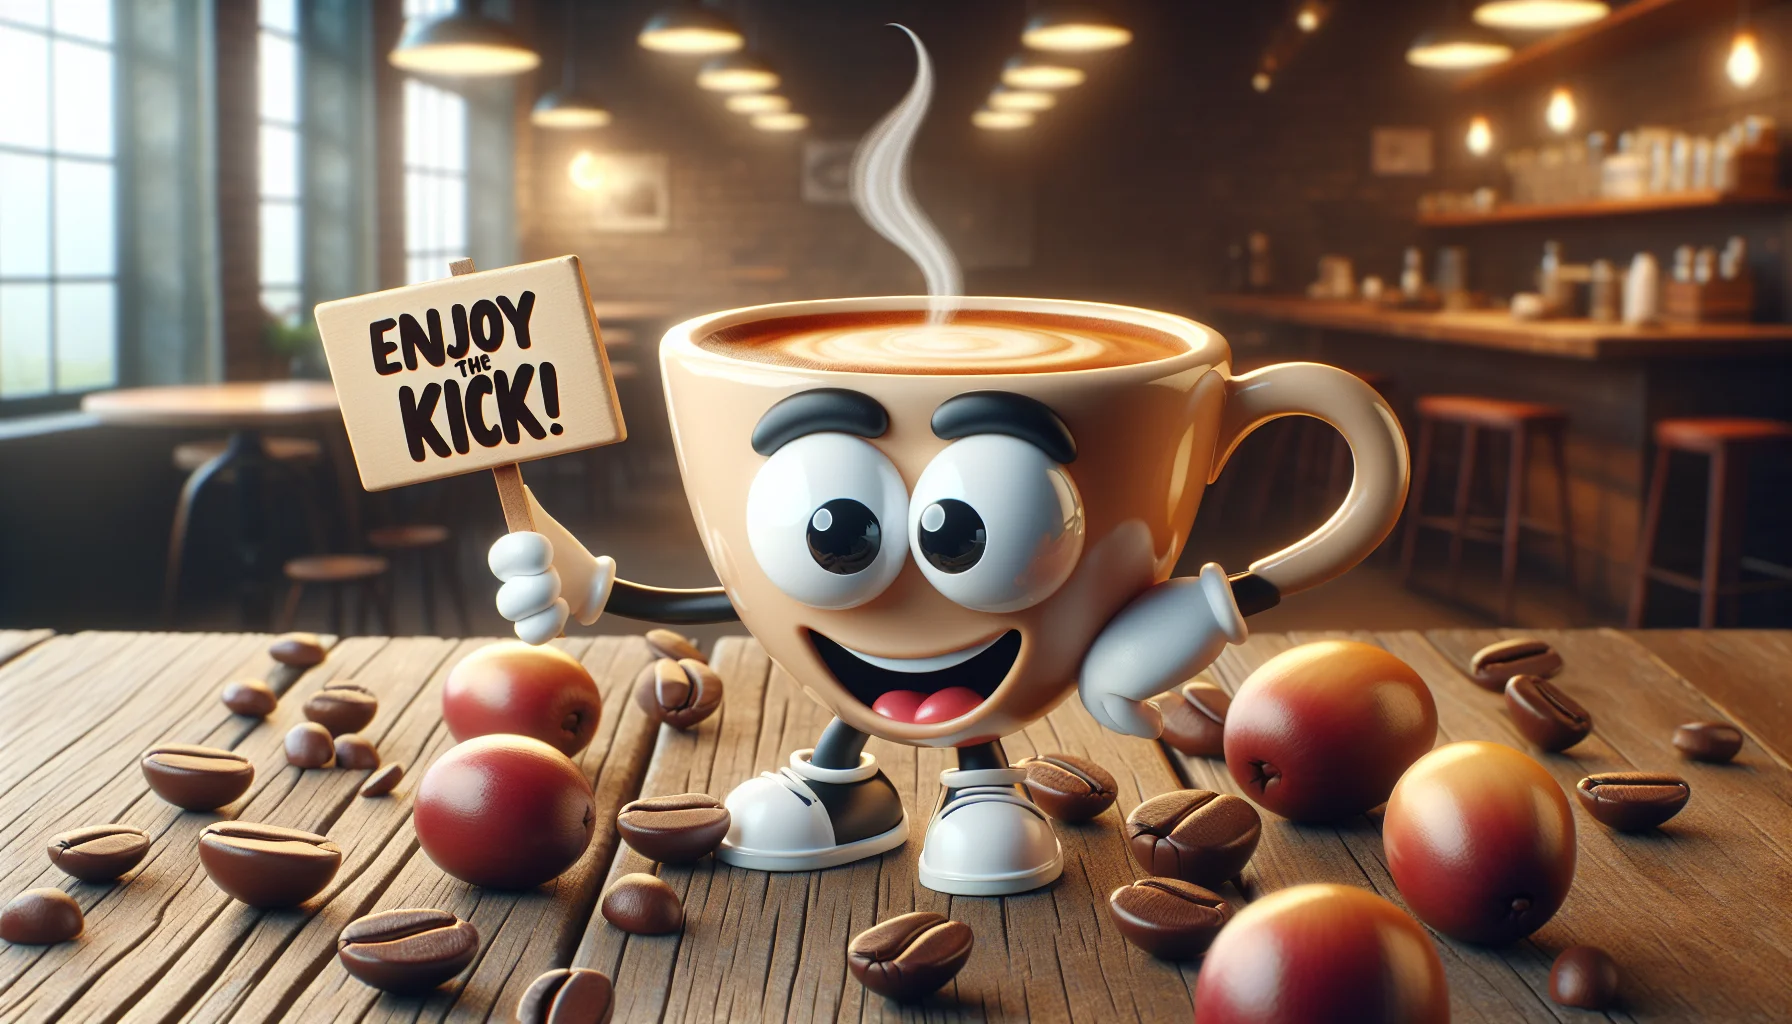 Create a humorous and realistic scenario with an anthropomorphic espresso cup. The cup has wide eyes and a charming smile, while its tiny hands hold a sign saying, 'Enjoy the kick!'. It stands on a rustic wooden table surrounded by ripe coffee beans, scattered cheekily. The background is a cozy cafe interior, complete with warm, soft lighting. The entire scene seems to be inviting people to join in the fun and savor the delicious espresso.